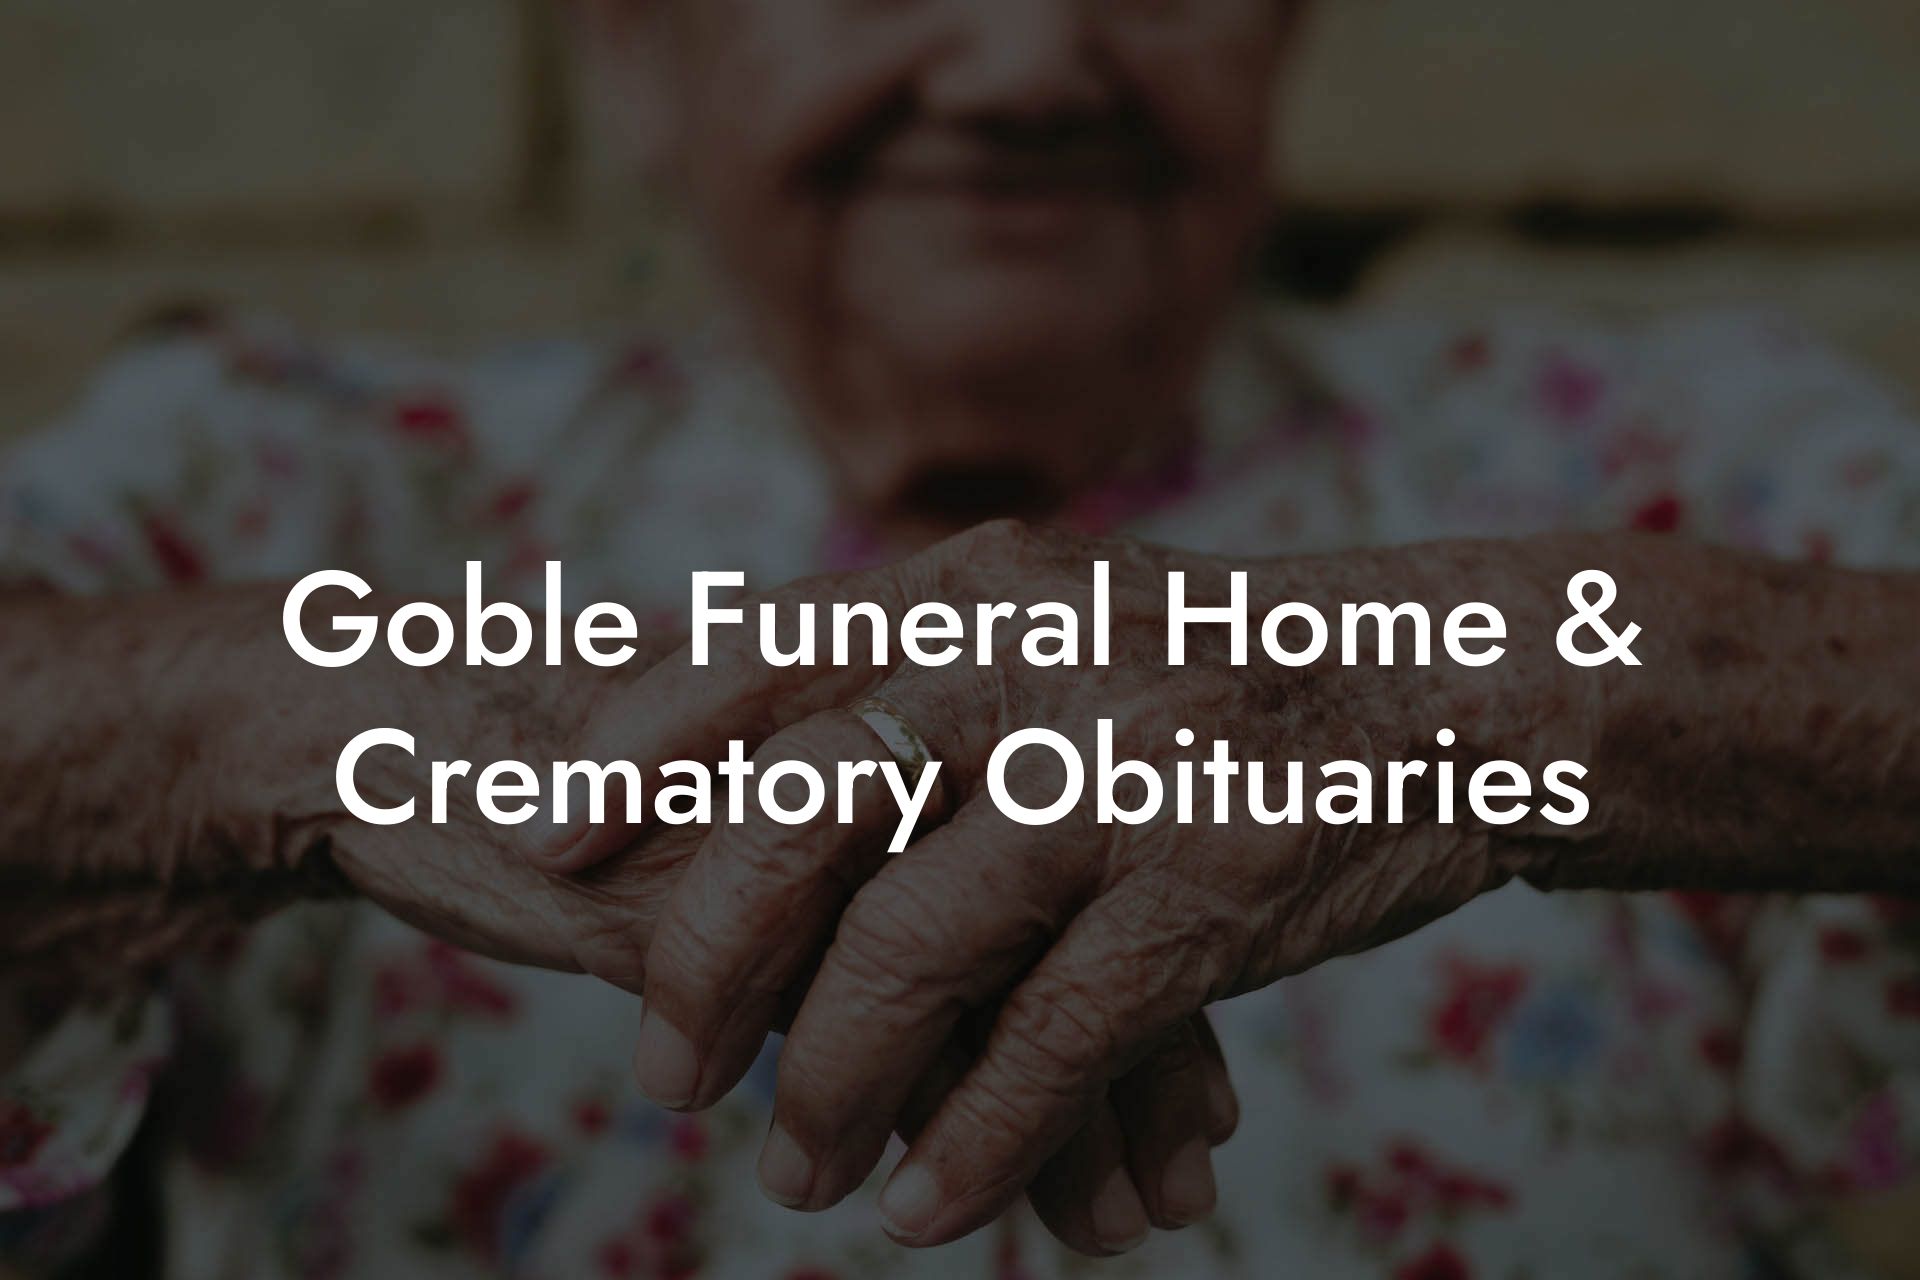 Goble Funeral Home & Crematory Obituaries